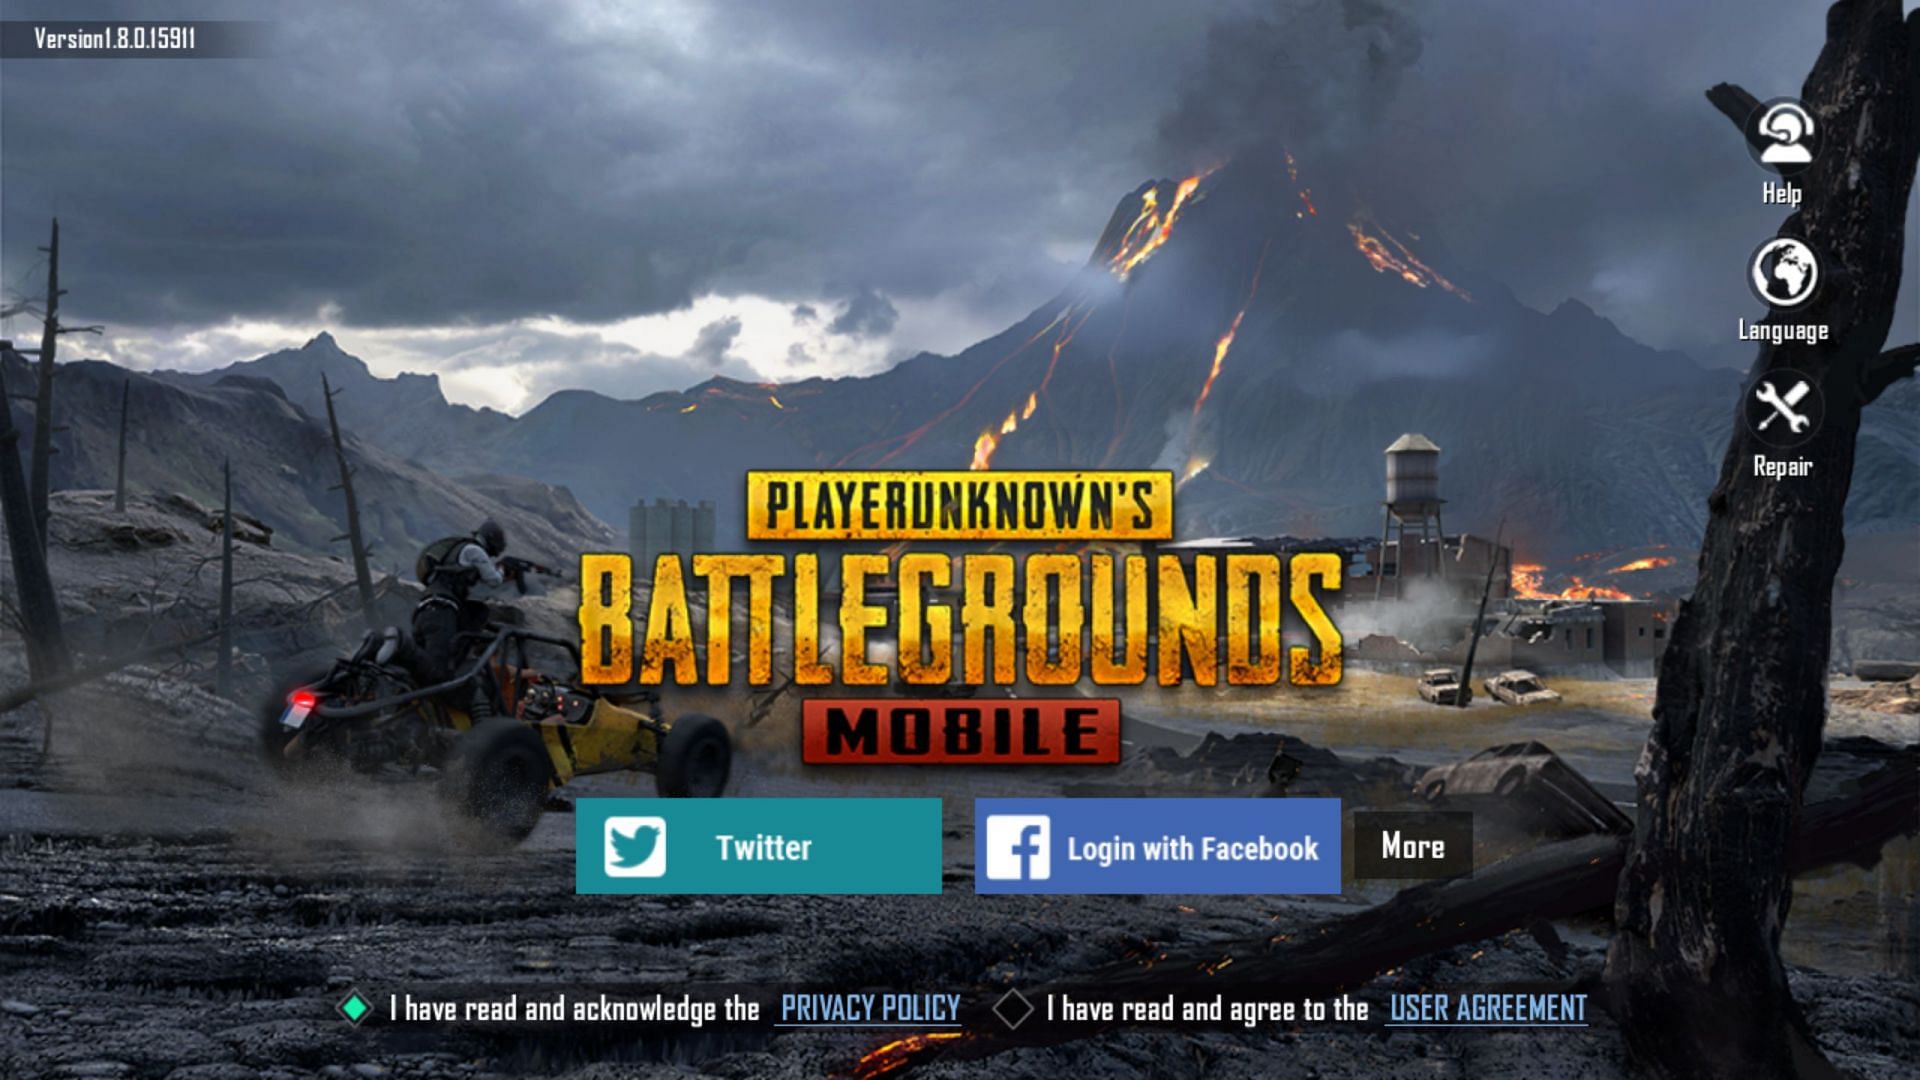 Download failed because the resources could not be found pubg mobile фото 39